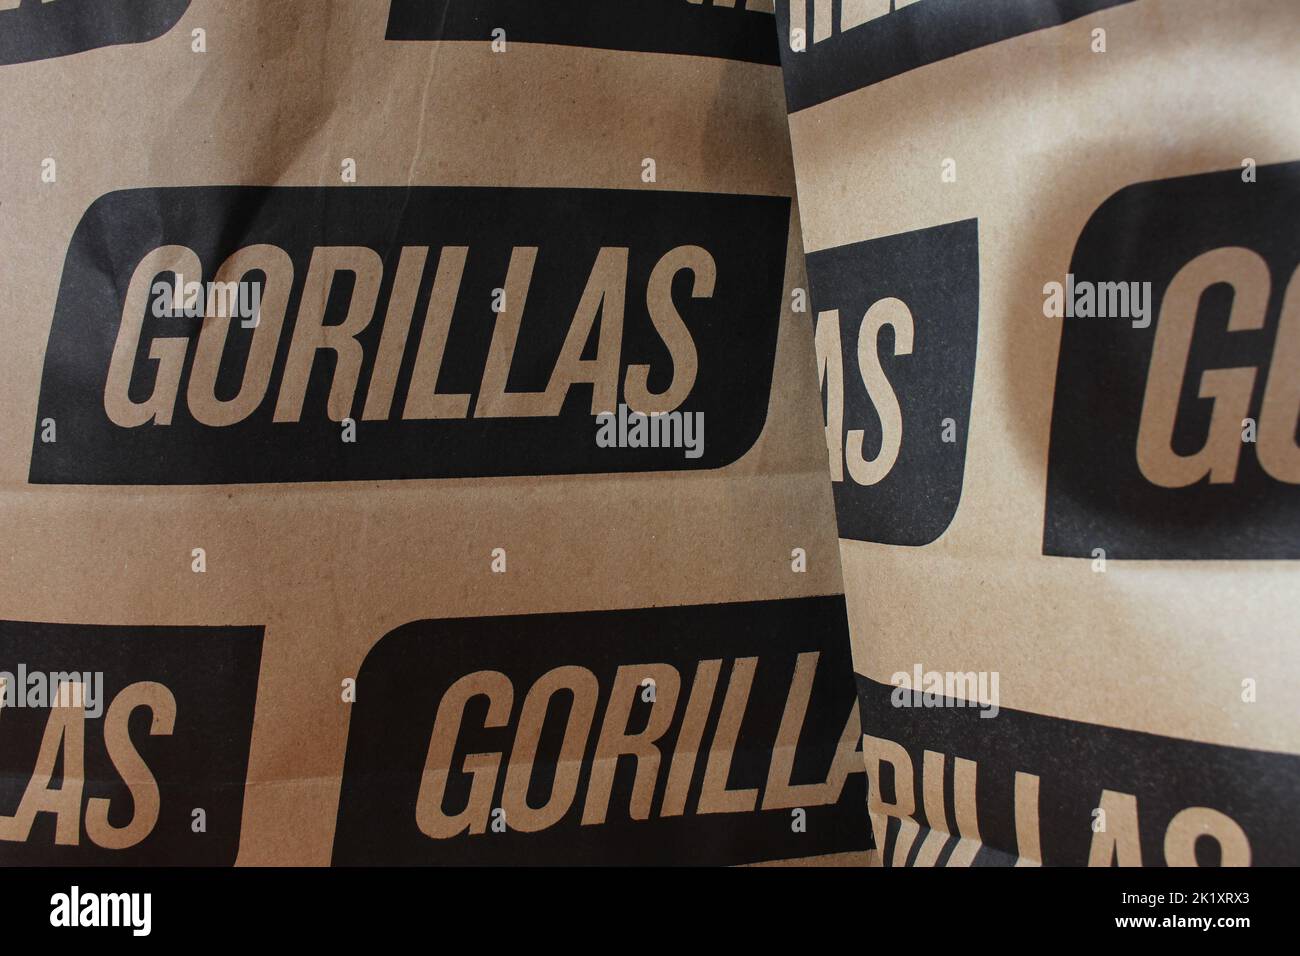 London, UK - September 12, 2022: Paper bags from the on-demand grocery delivery company Gorillas which claims to deliver groceries in 10 minutes Stock Photo